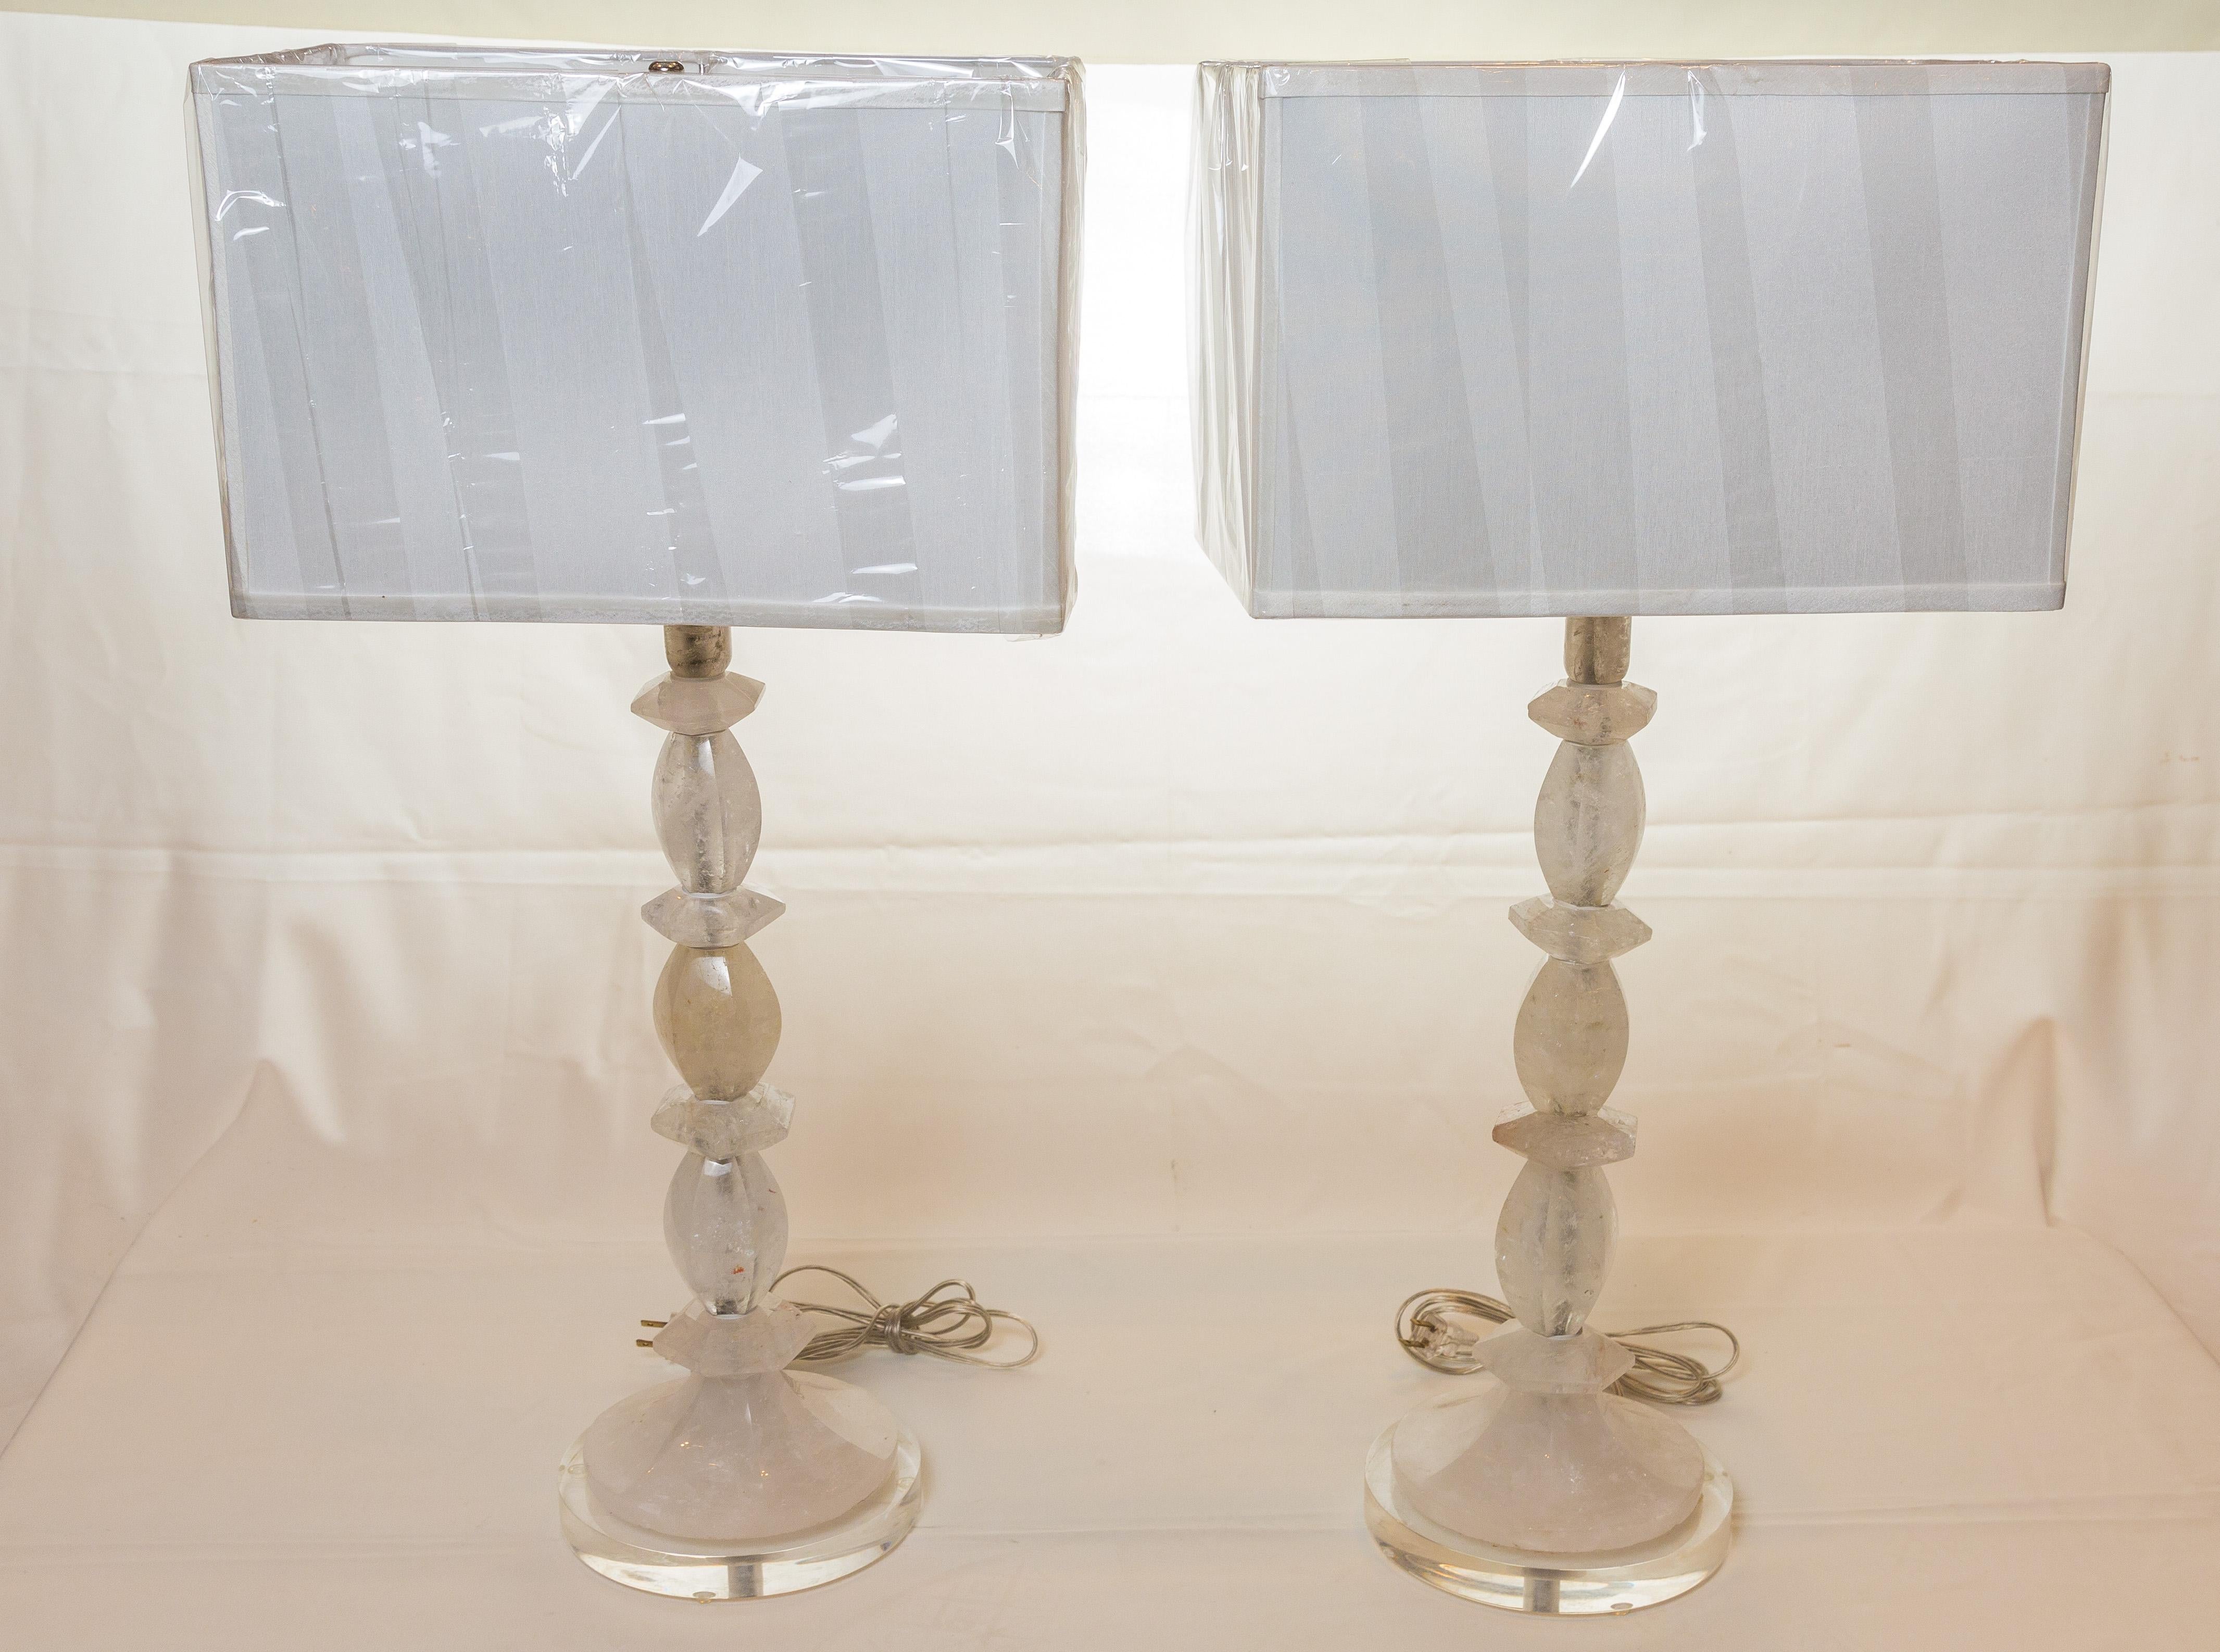 Pair of Brazilian Rock Crystal Lamps In Excellent Condition For Sale In Dallas, TX